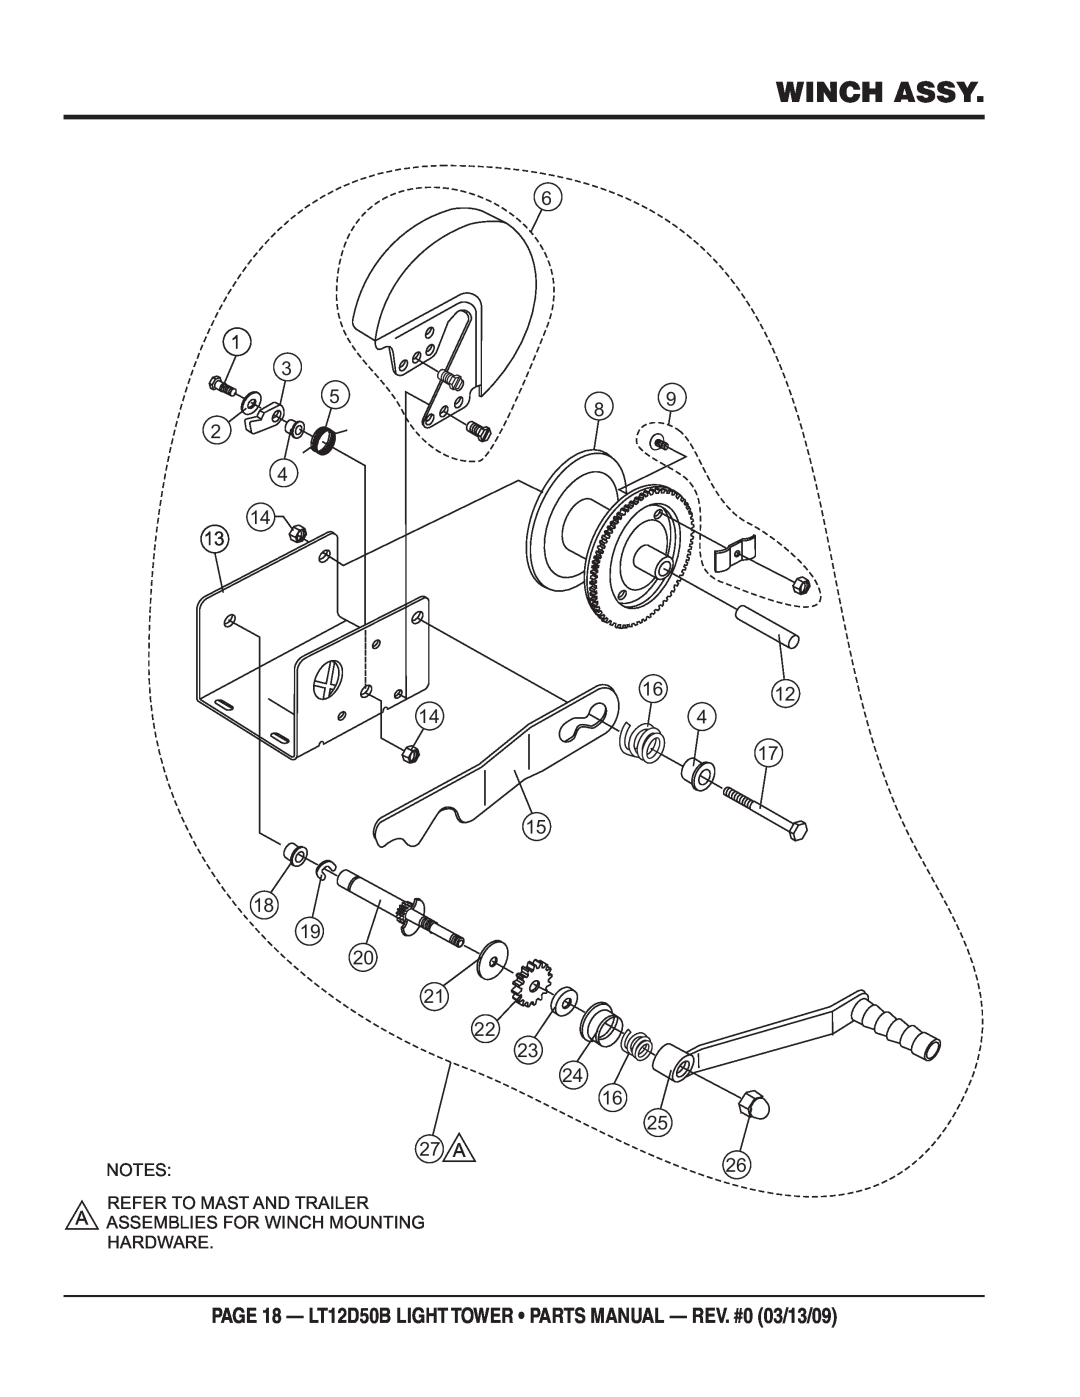 Multiquip manual Winch Assy, PAGE 18 - LT12D50B LIGHT TOWER PARTS MANUAL - REV. #0 03/13/09, 1612, 27 A 